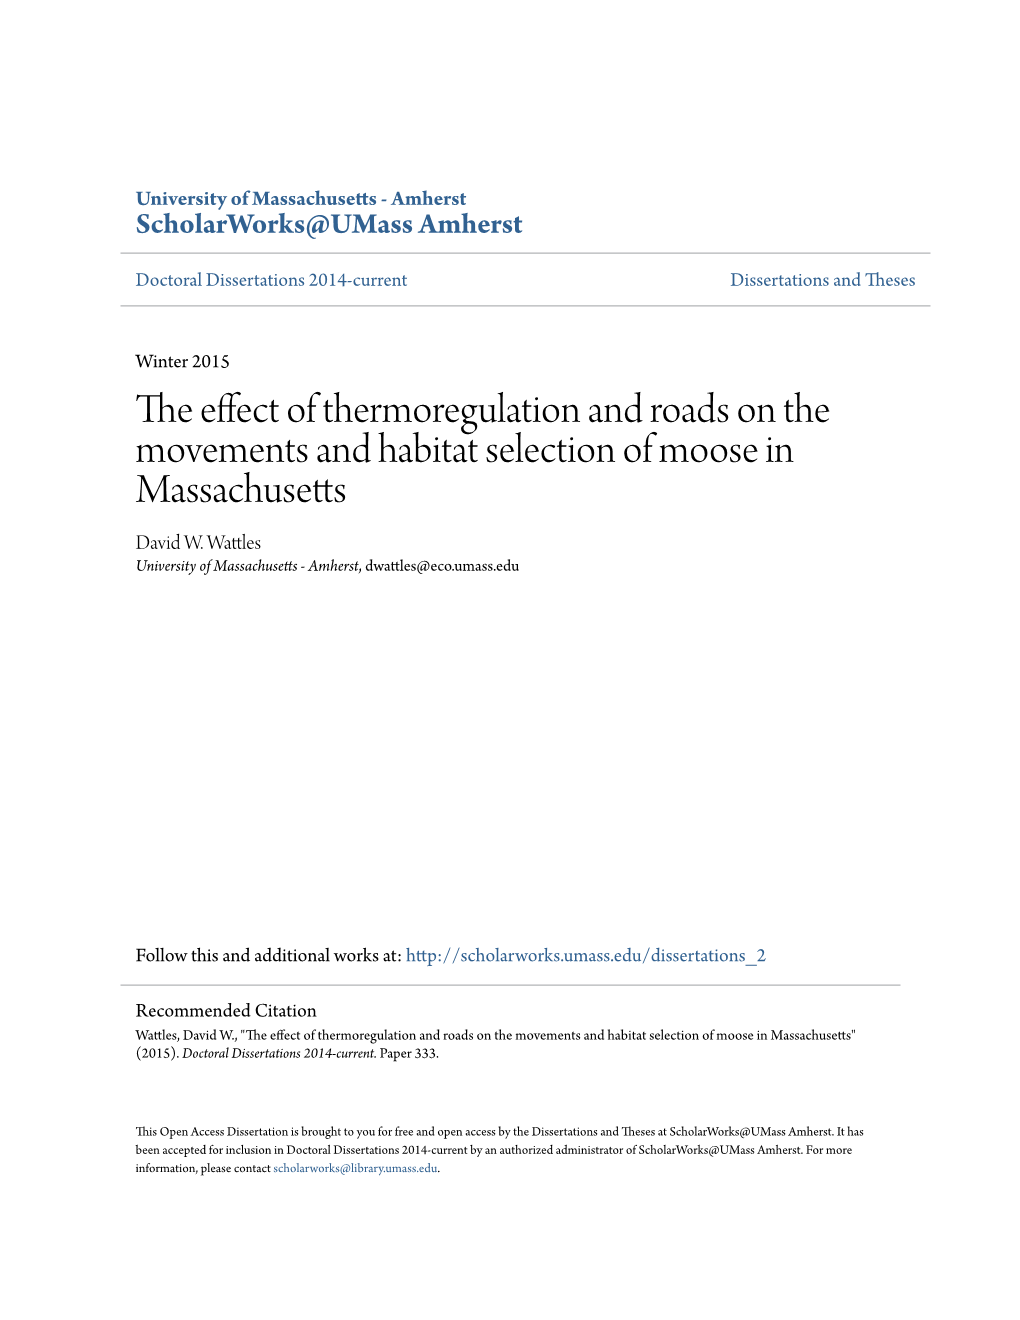 The Effect of Thermoregulation and Roads on the Movements and Habitat Selection of Moose in Massachusetts David W